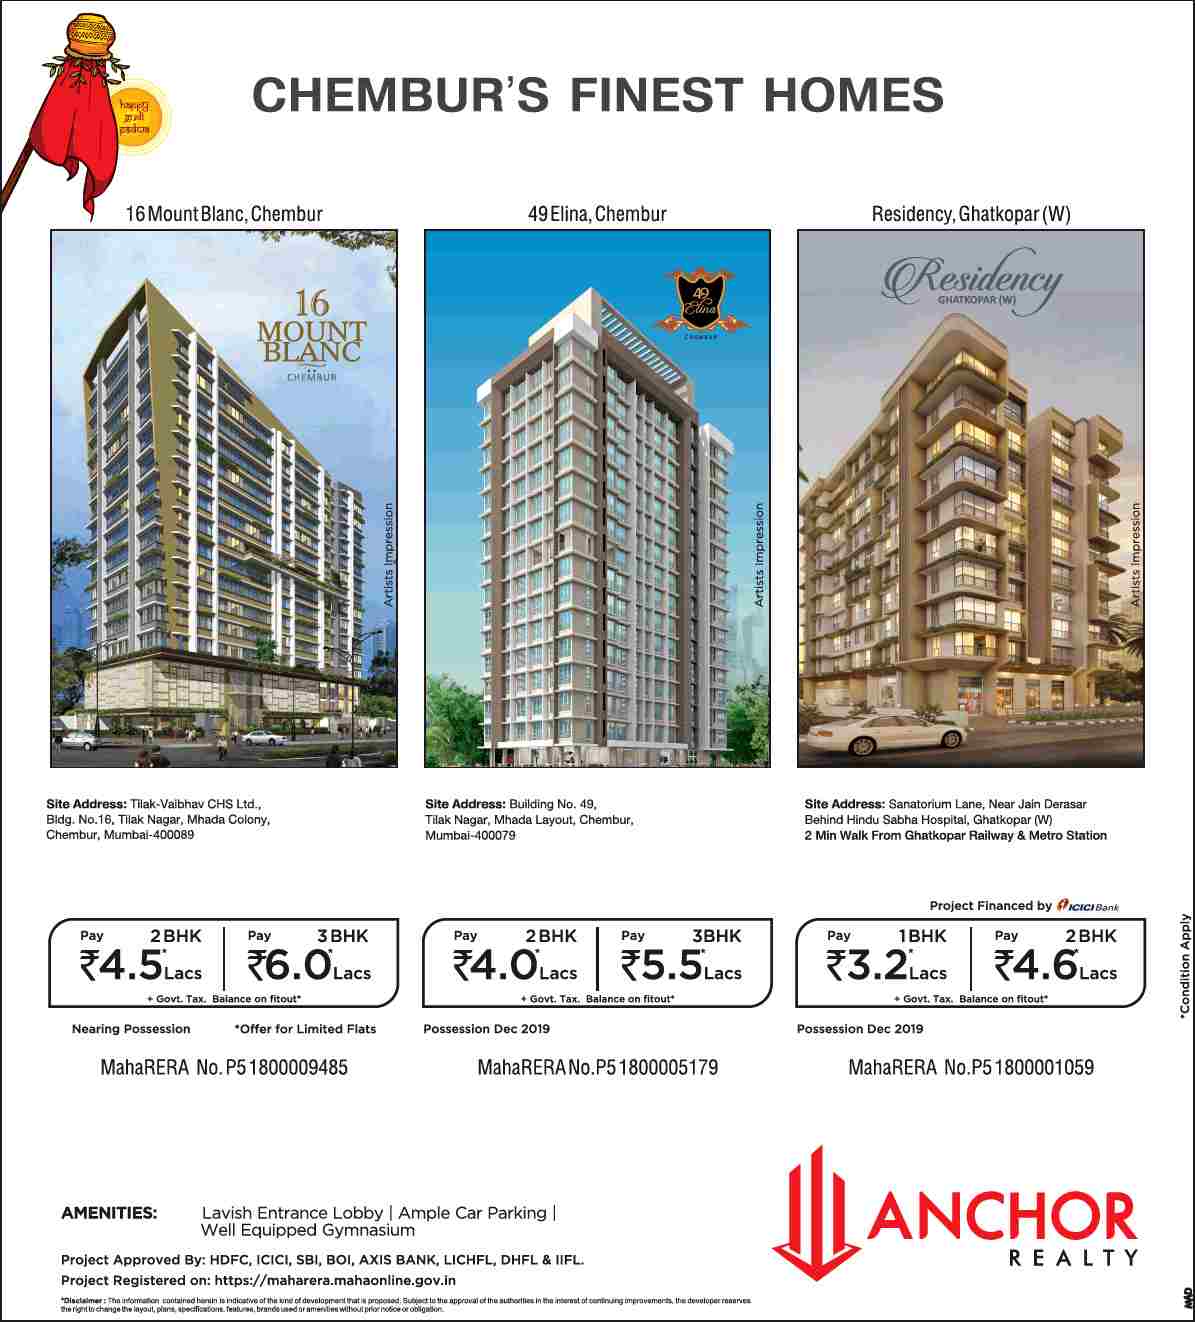 Invest in Chembur's finest homes by Anchor Realty Update